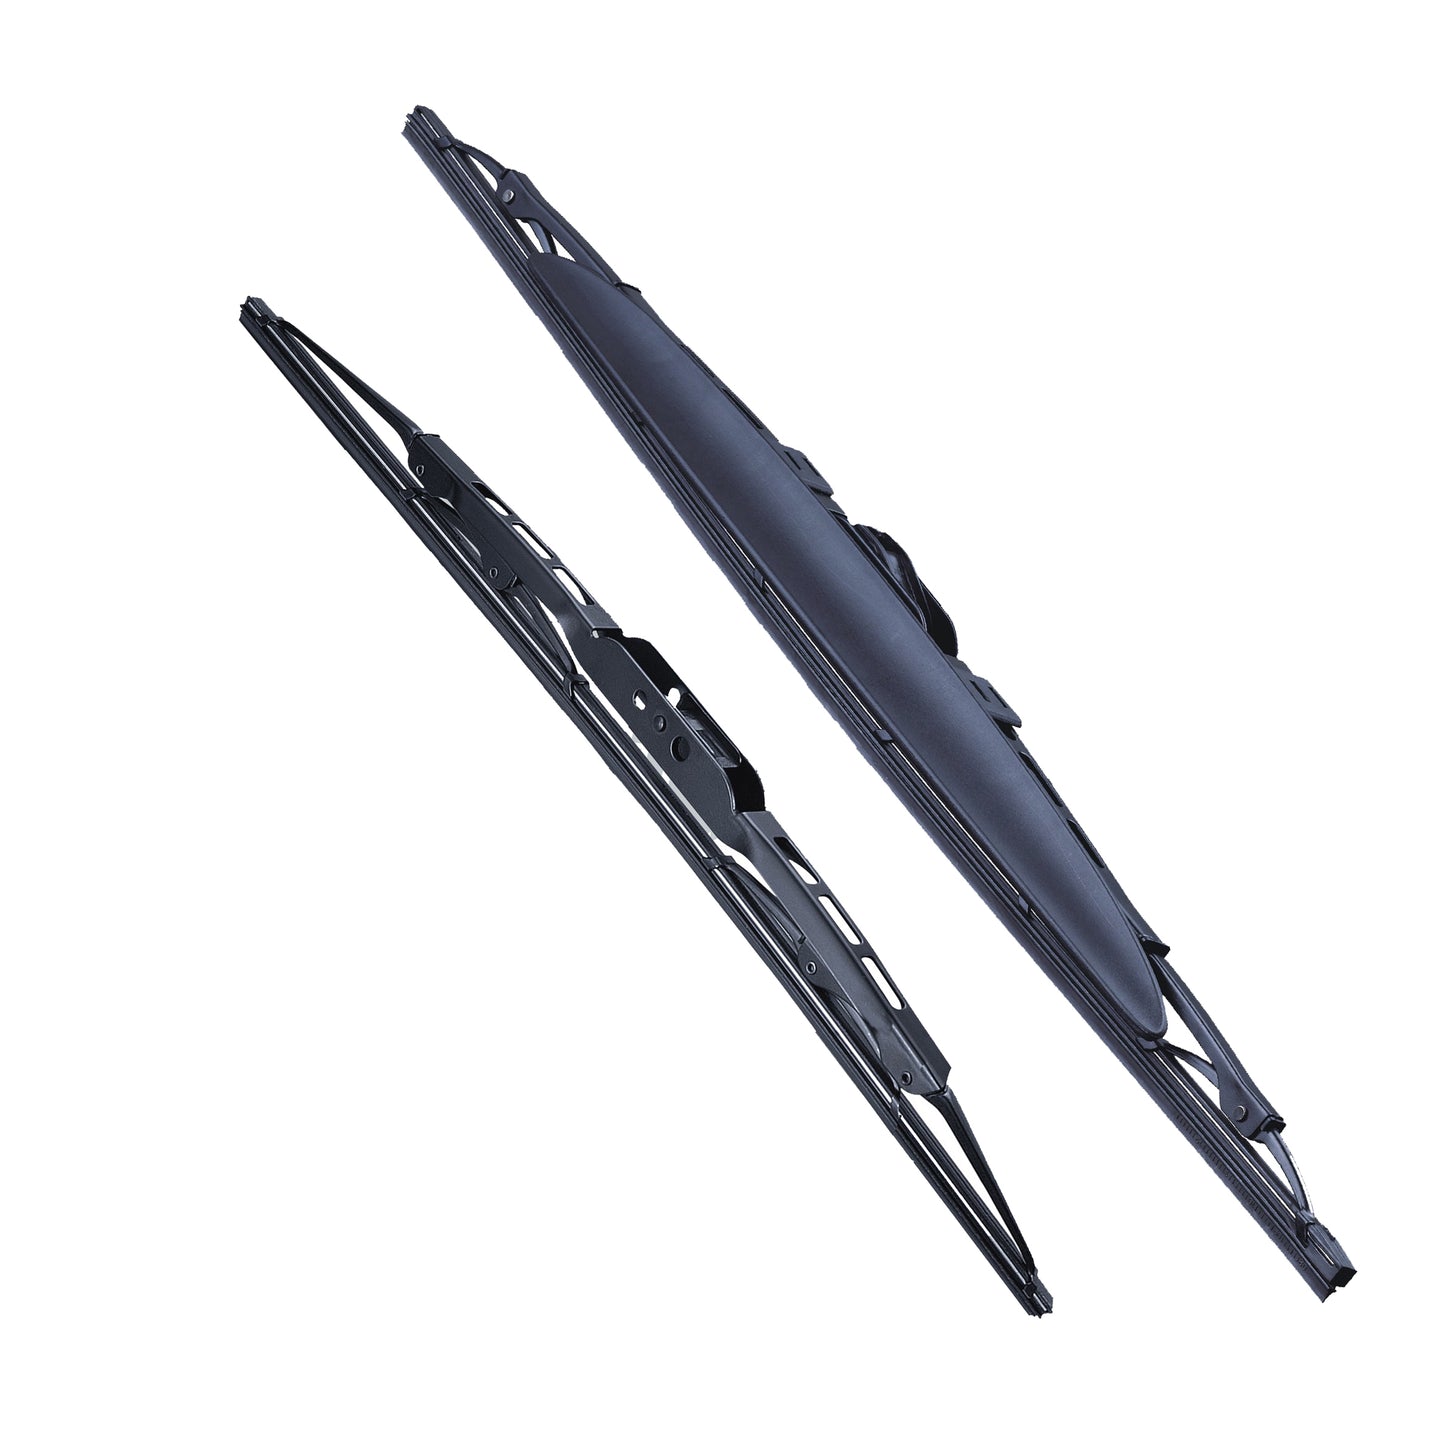 FIAT SCUDO Chassis Cab Sep 1996 to Dec 2006 Wiper Blade Kit